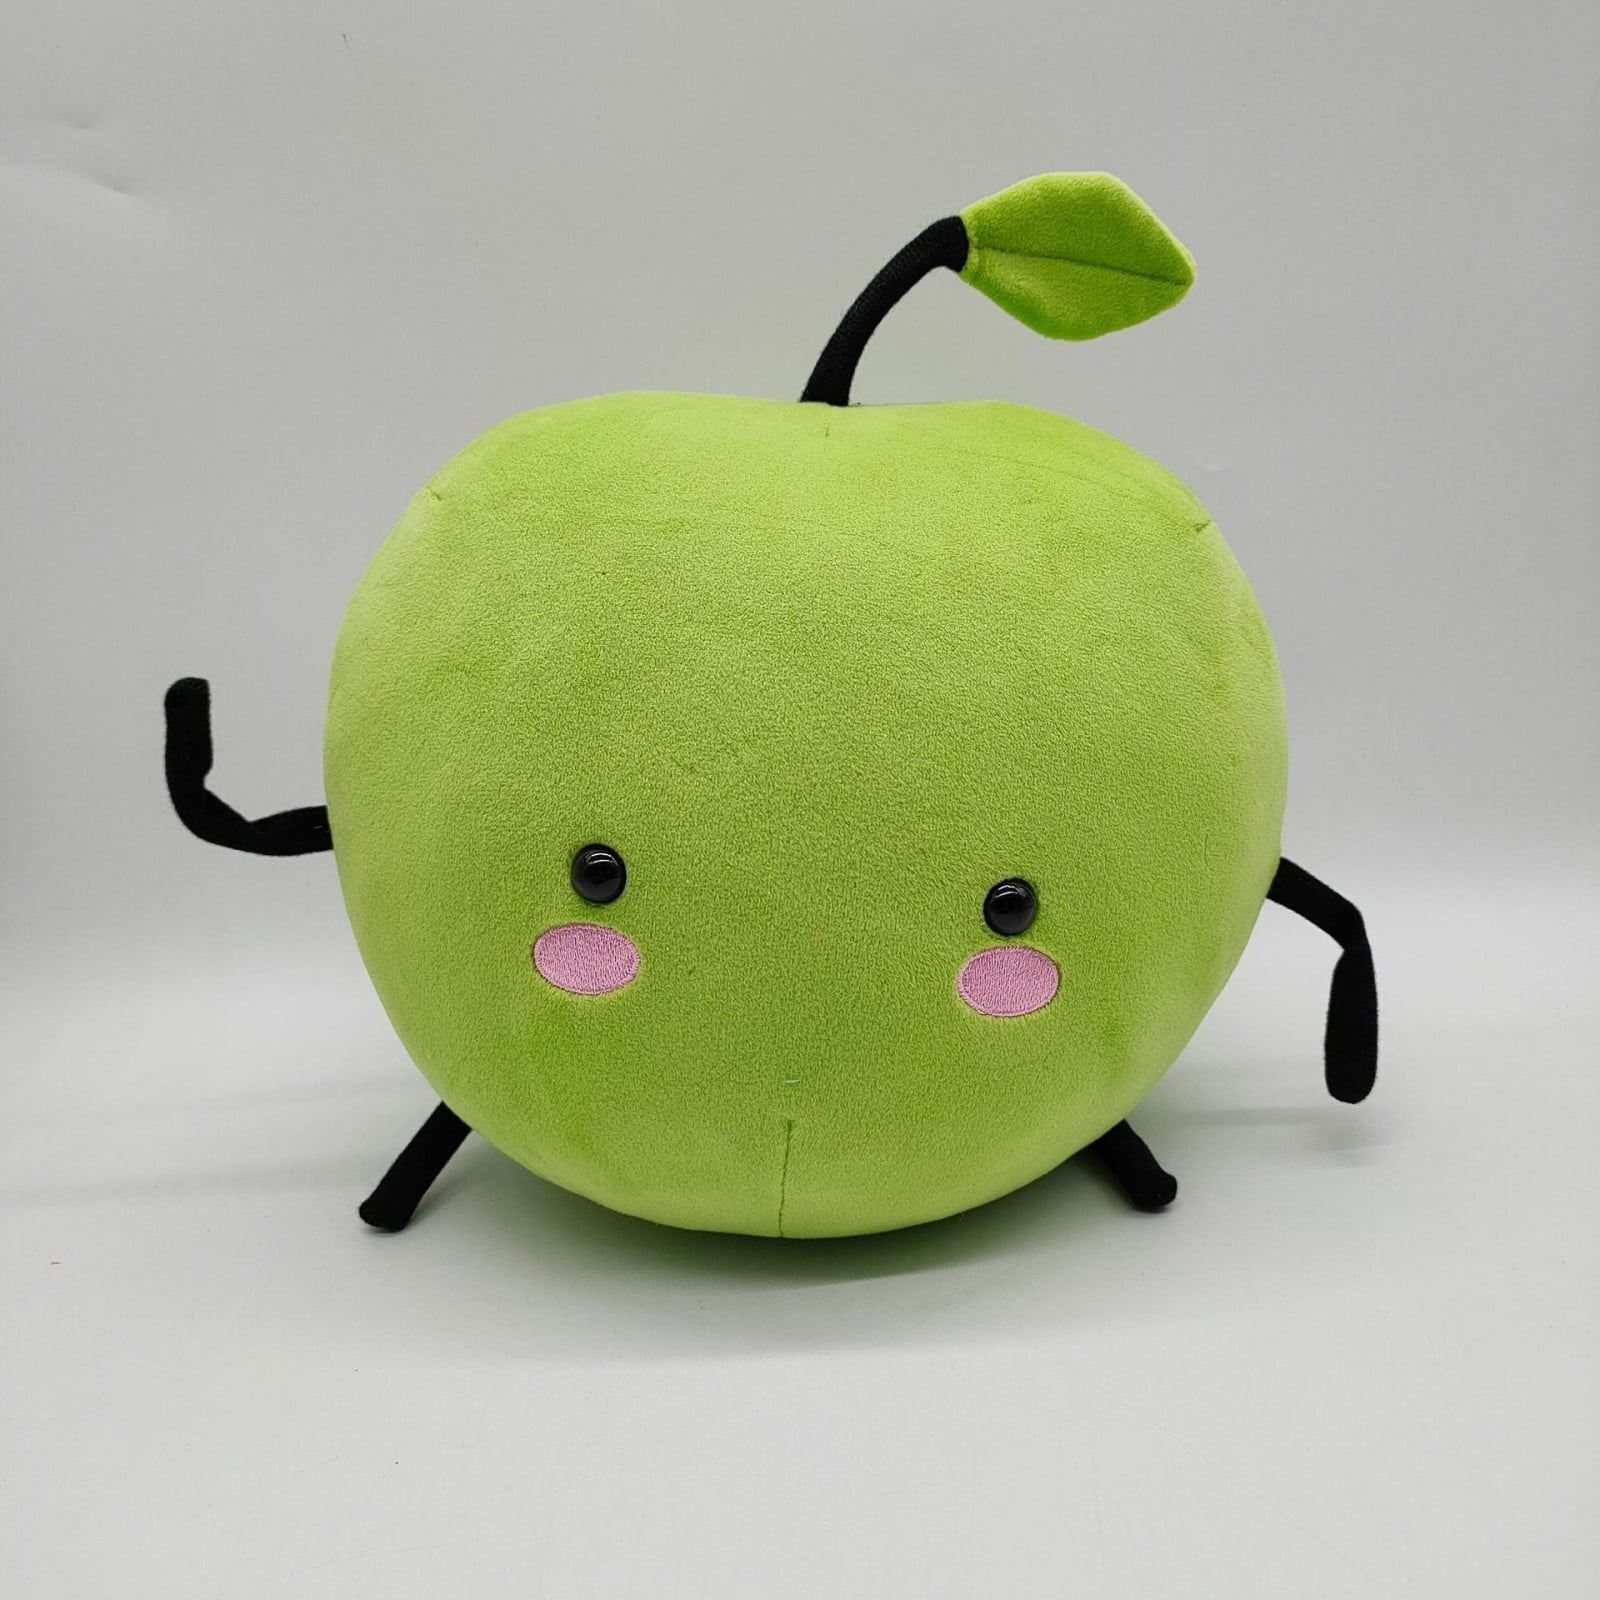 Stardew Plush Cute Valley Apple Stuffed Plush Toy, 9.8 Inch Cartoon Apple  Design Fruit Animation Games Figure Soft Stuffed Throw Pillow Doll, Gift  for